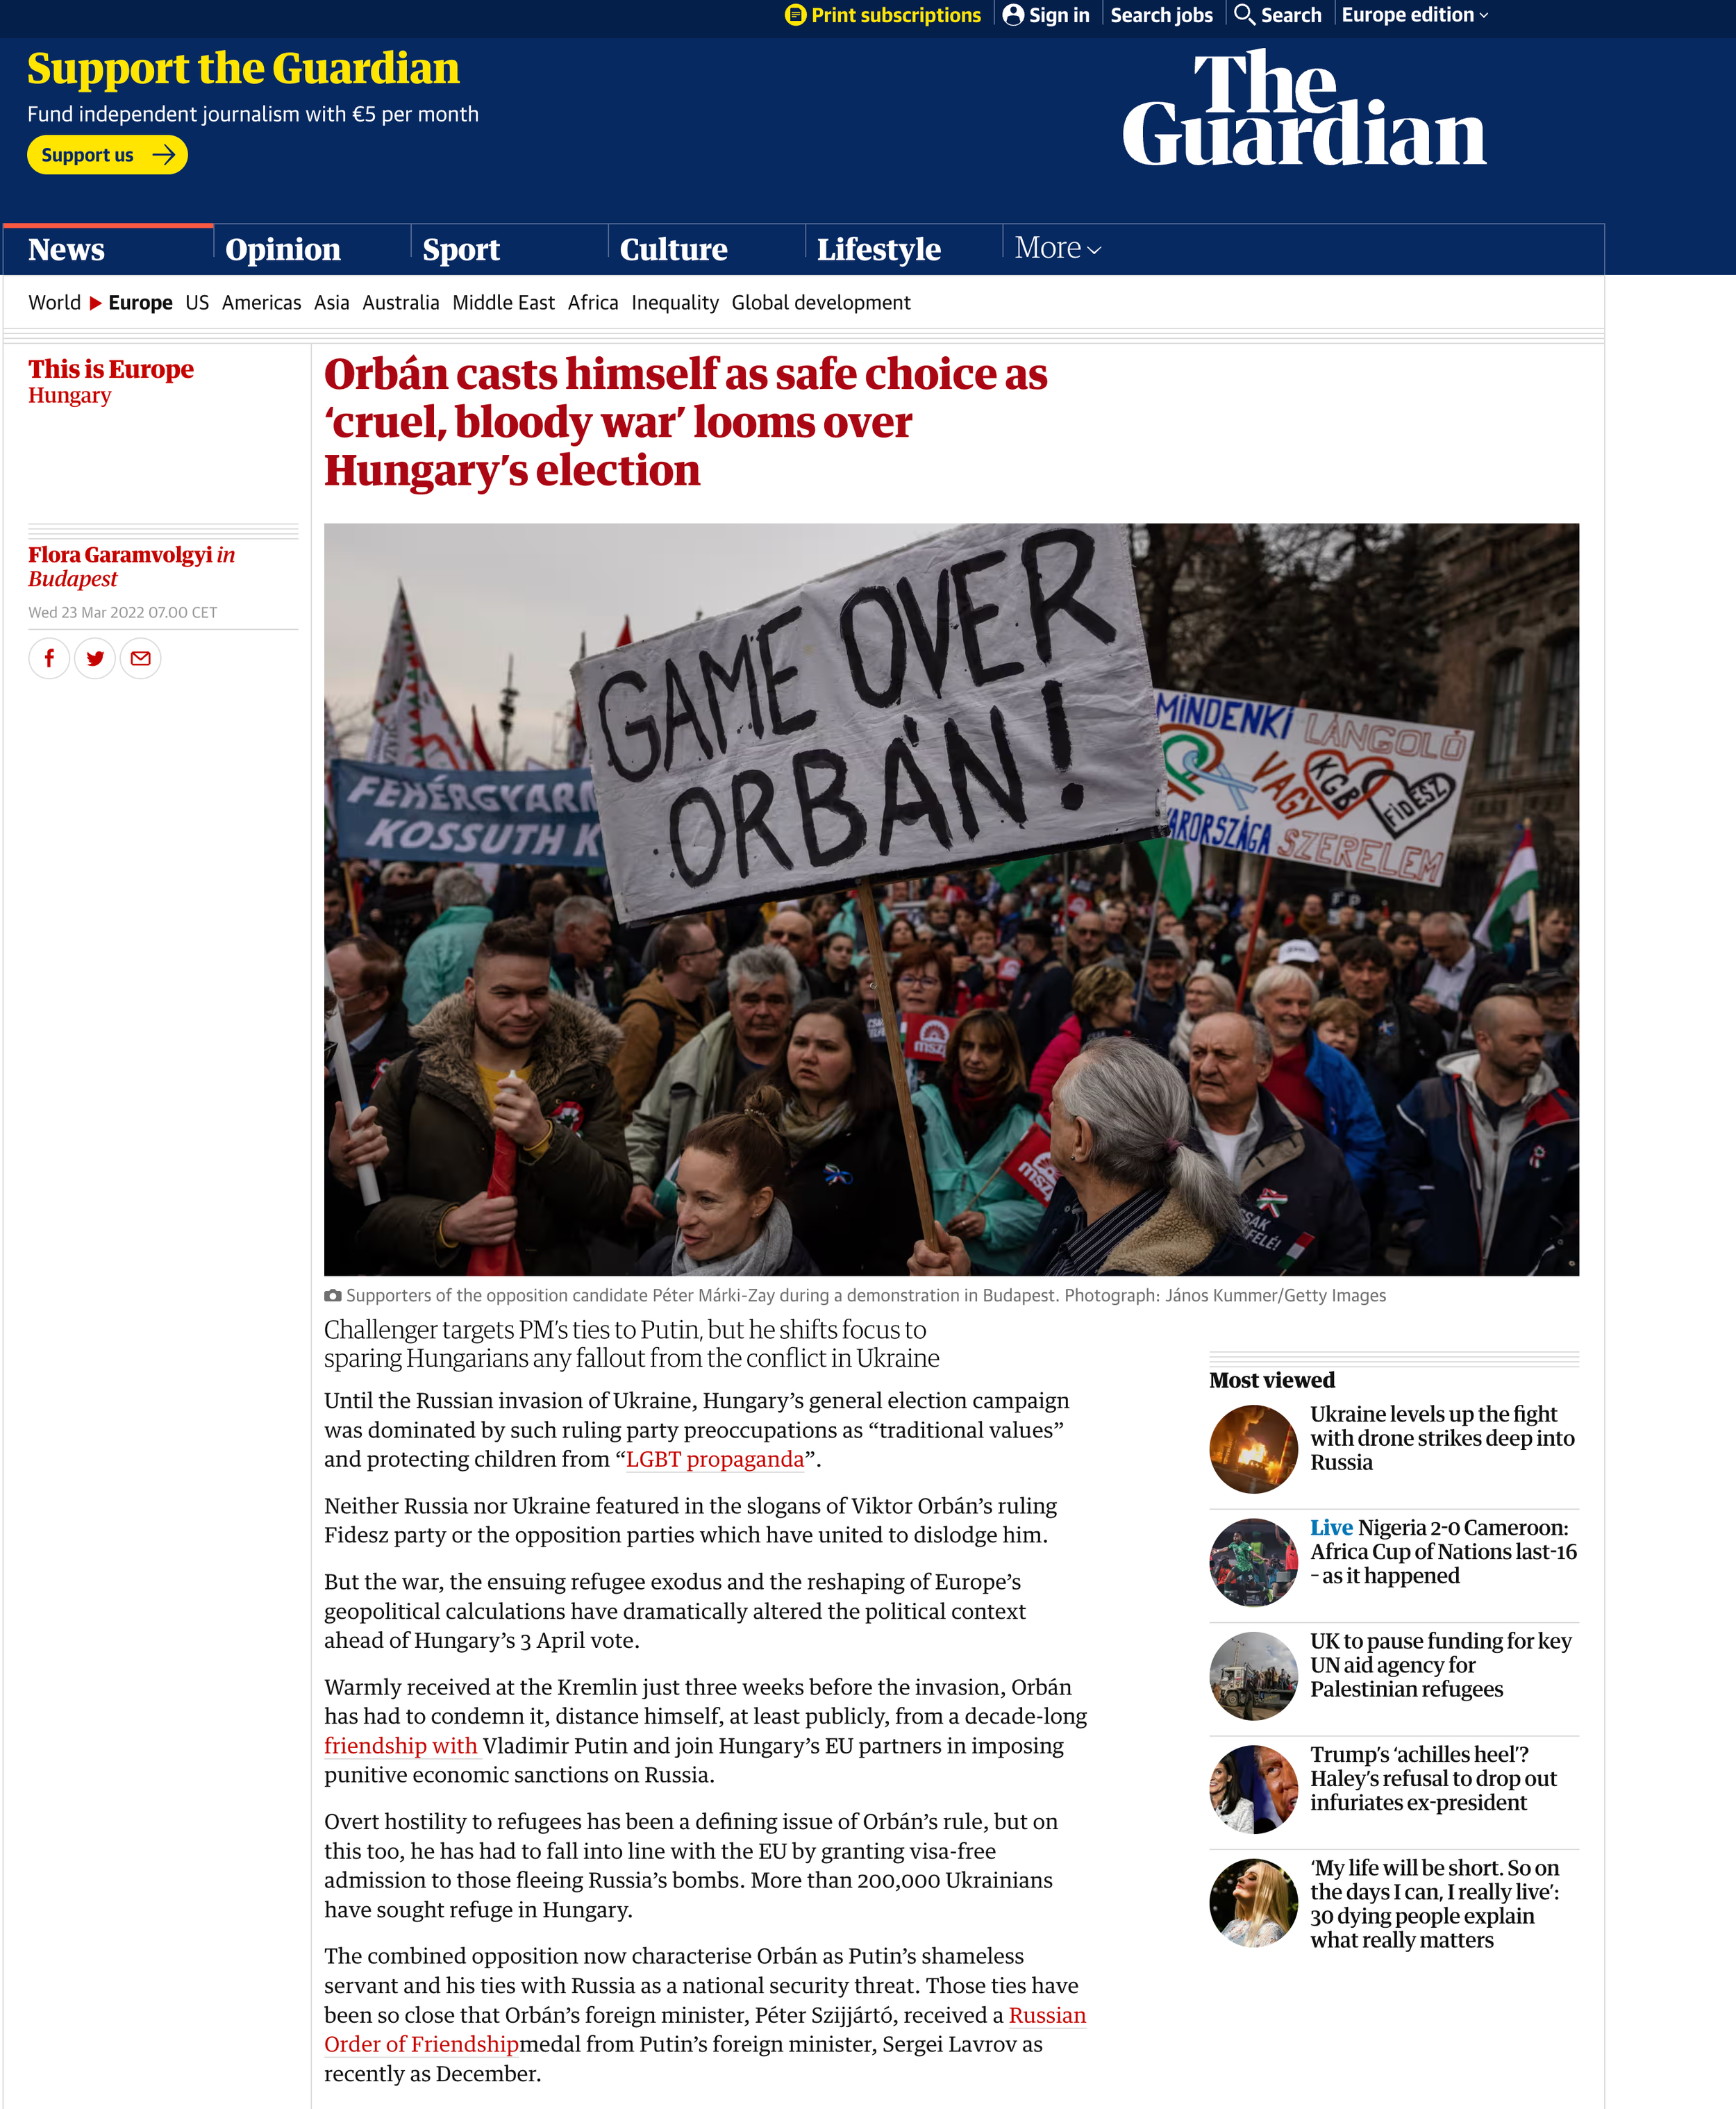 screencapture-theguardian-world-2022-mar-23-orban-casts-himself-as-safe-choice-as-cruel-bloody-war-looms-over-hungarys-election-2024-01-27-23_31_42.png